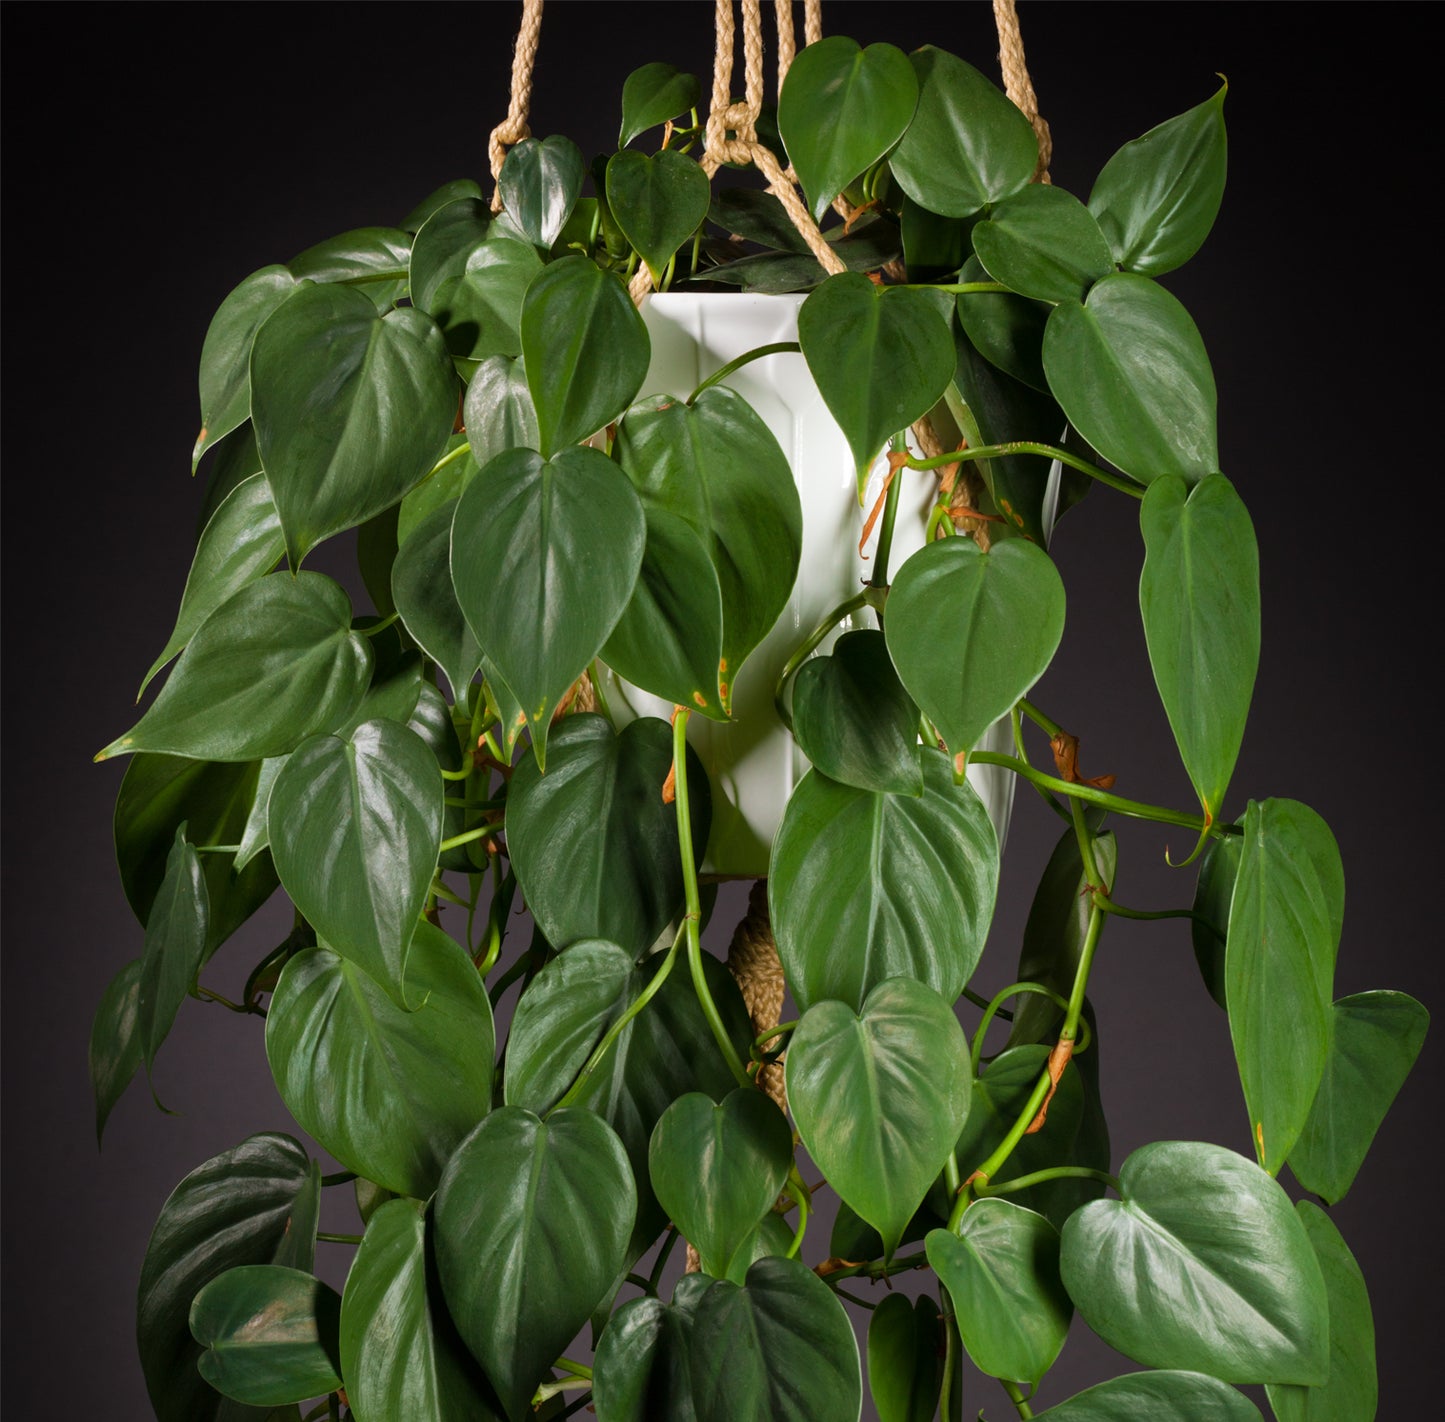 Philodendron hederaceum / Heartleaf philodendron